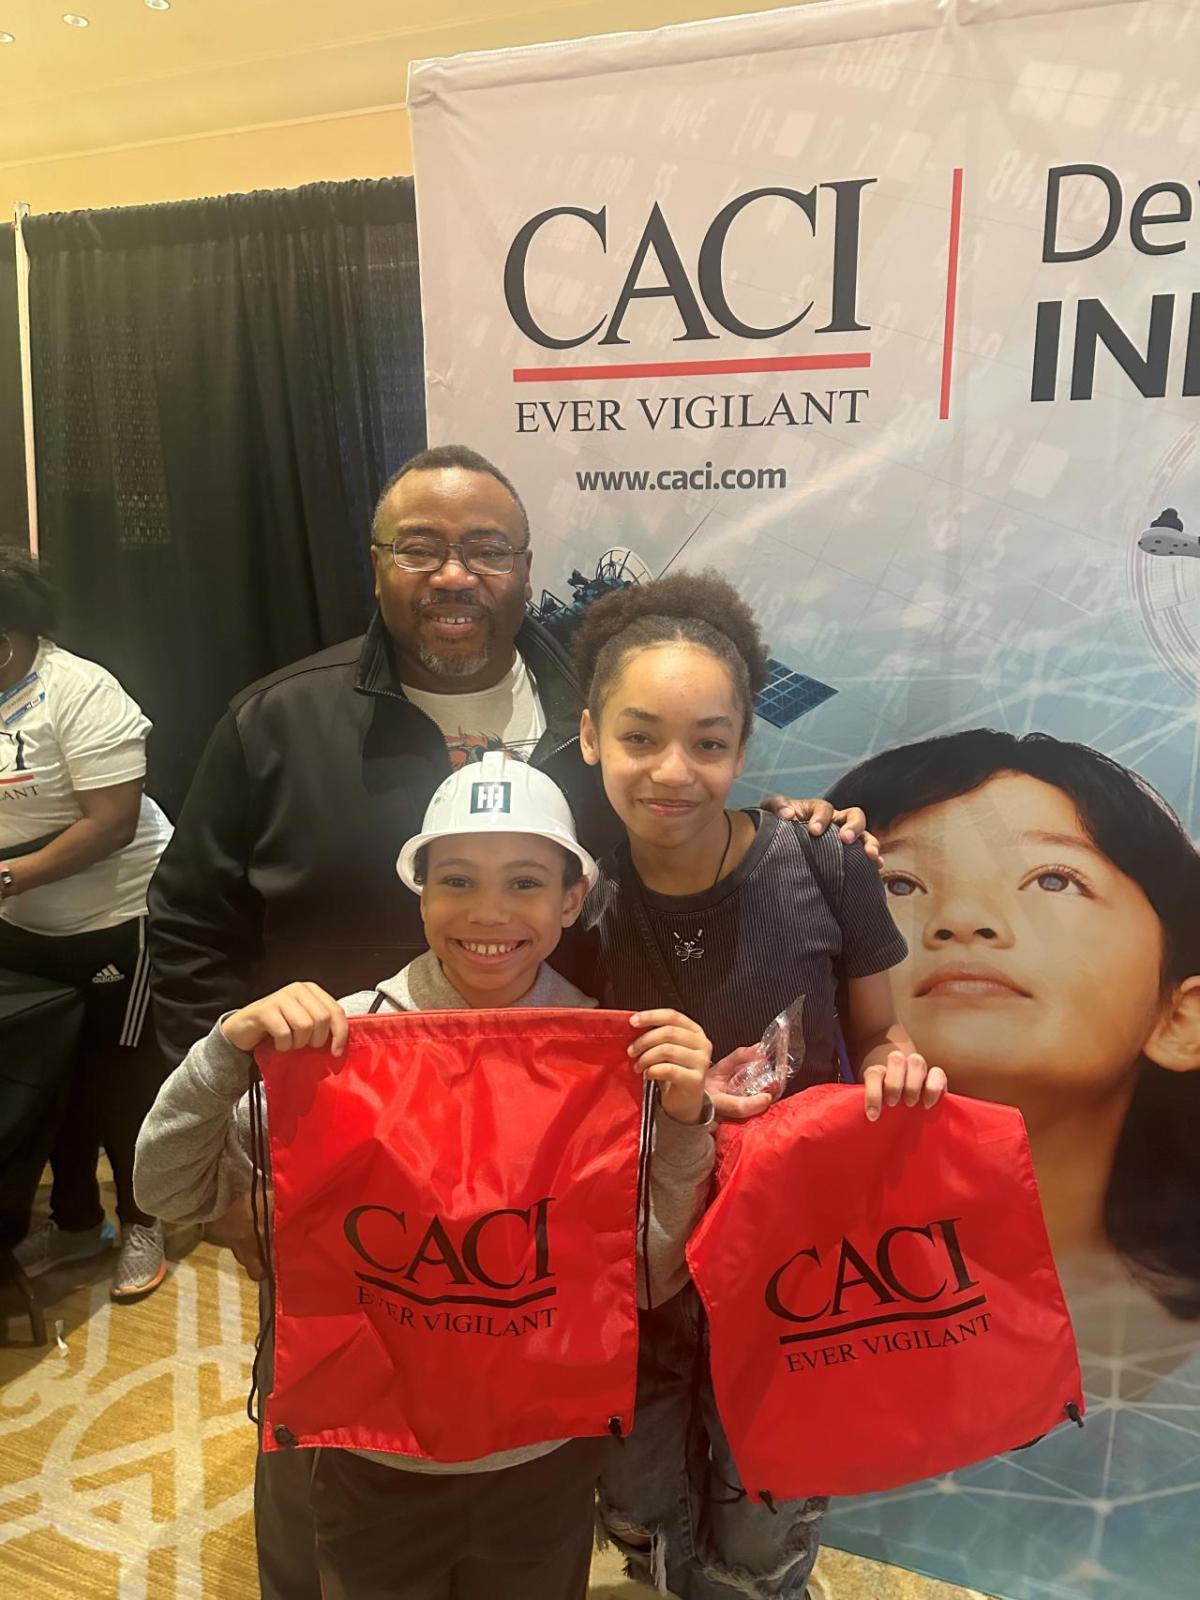 A group of three pose in front of a CACI banner, holding a CACI bag.